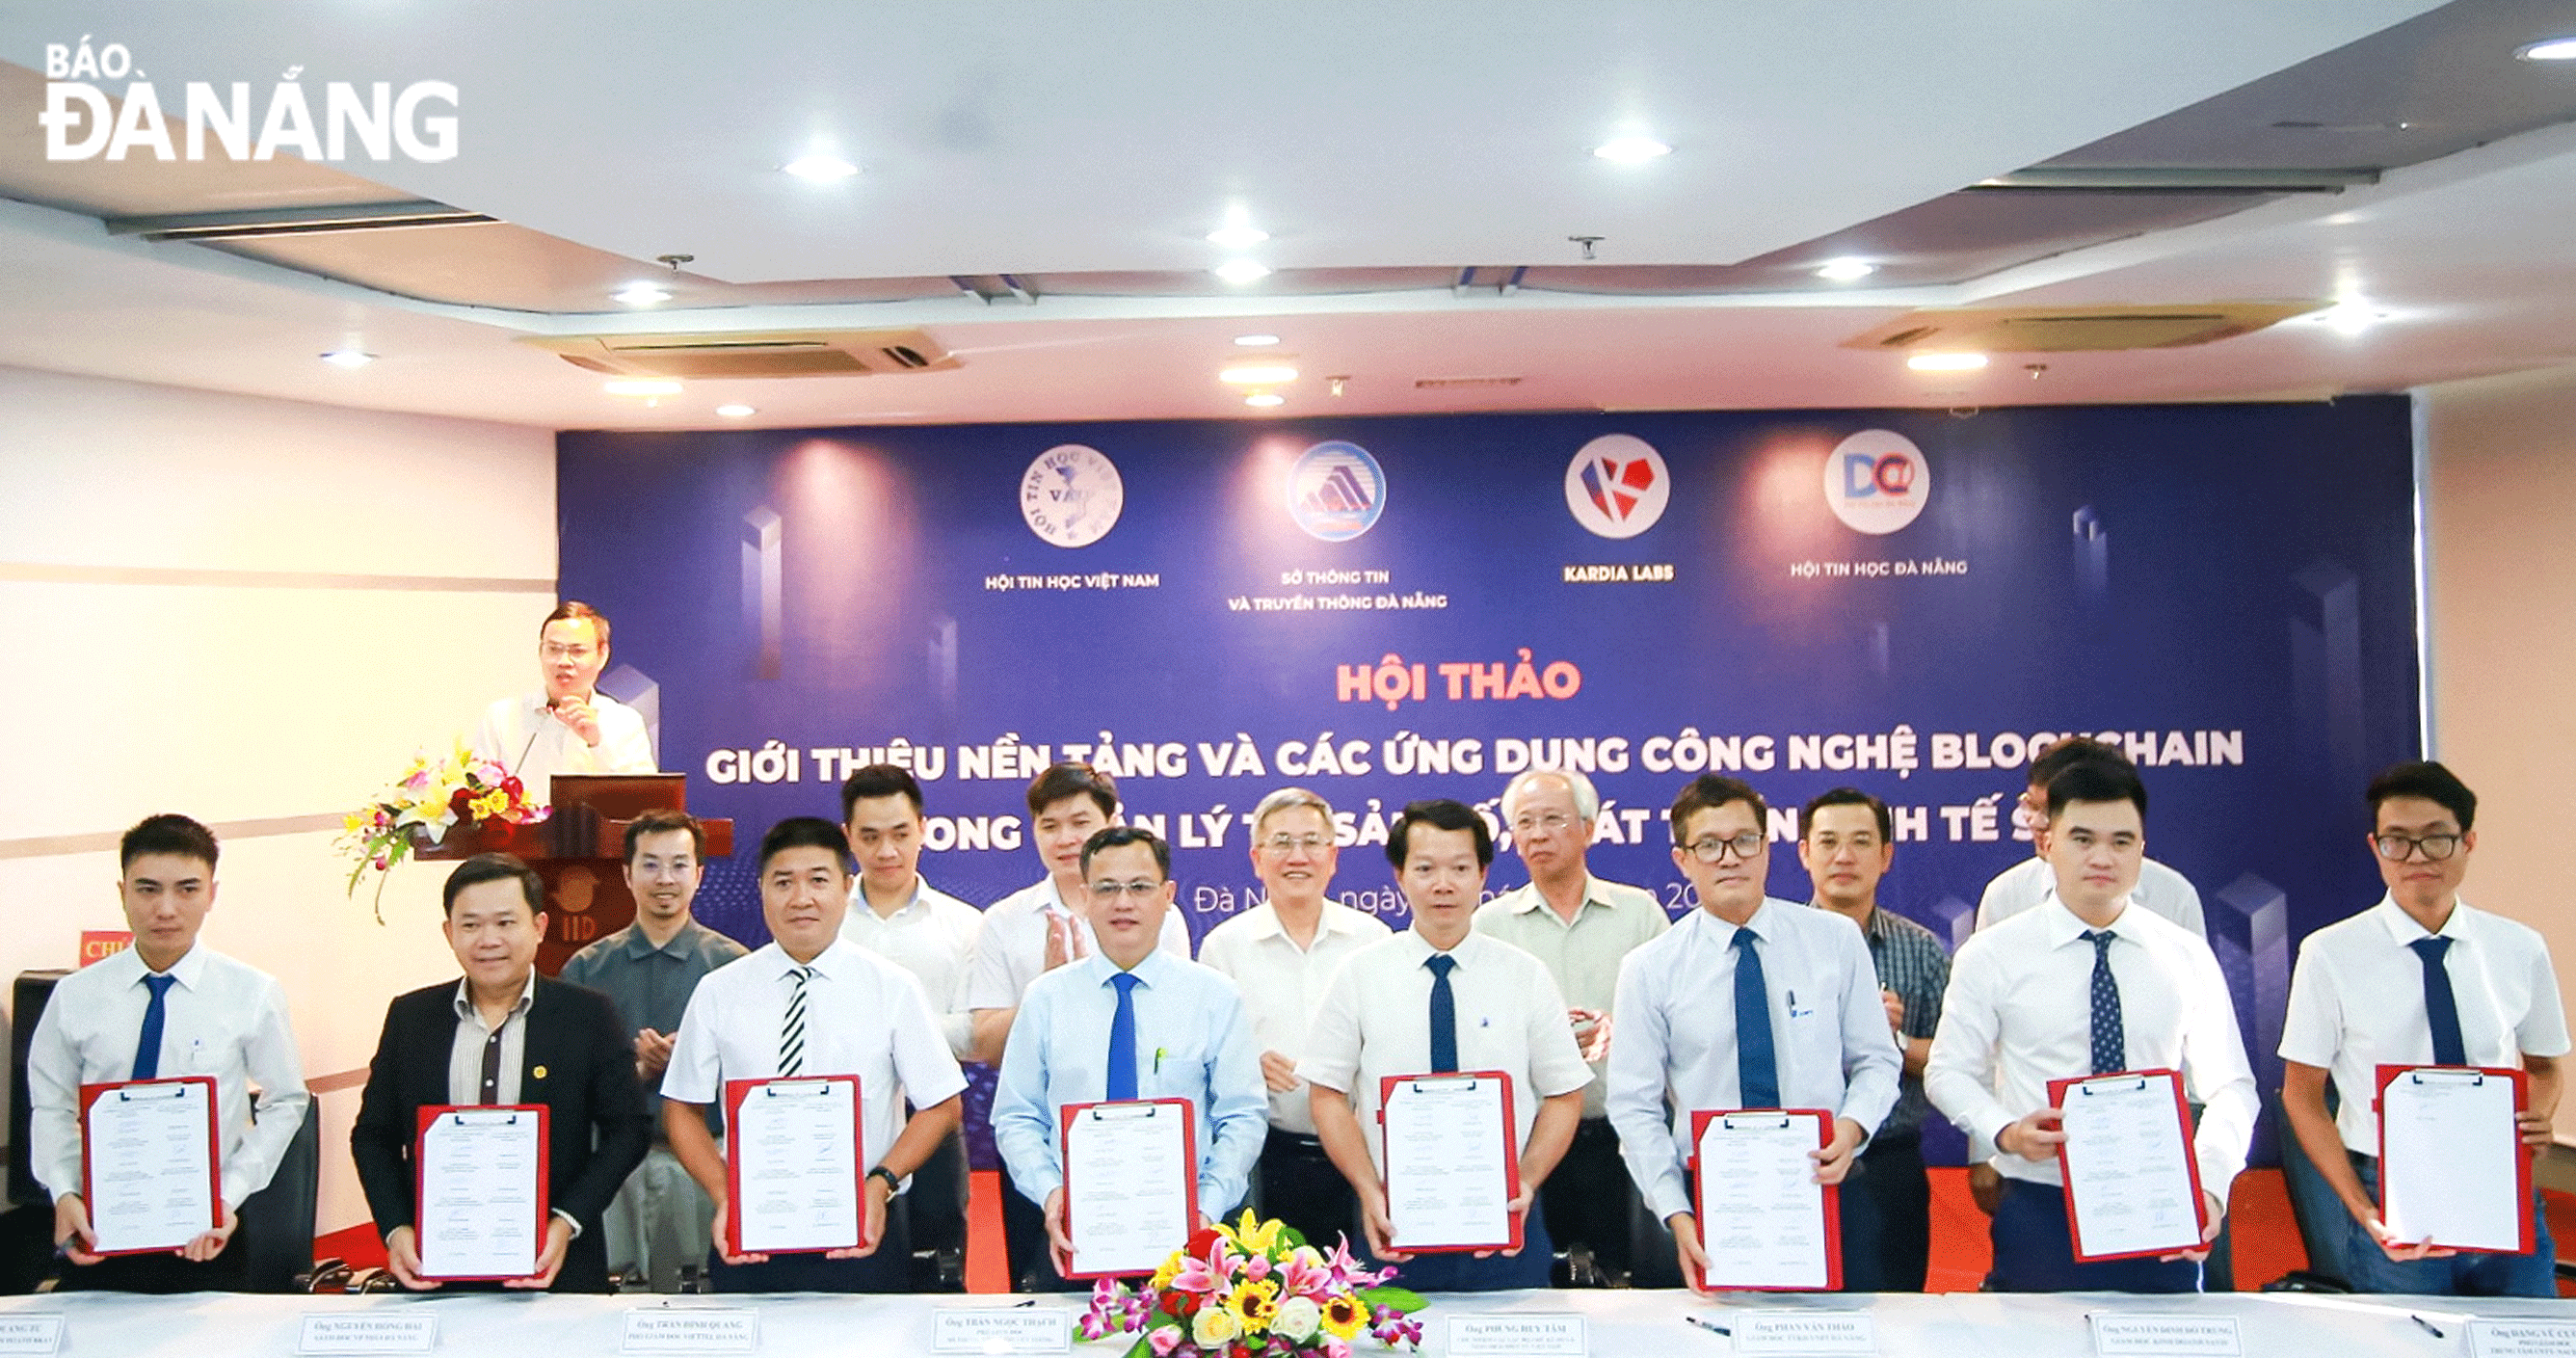 The Da Nang Department of Information and Communications, the Viet Nam Digital Signature and Electronic Transaction Club, and 8 businesses currently providing public digital signature authentication services in the city signed a Memorandum of Understanding on providing free digital signatures for people. Photo: CHIEN THANG